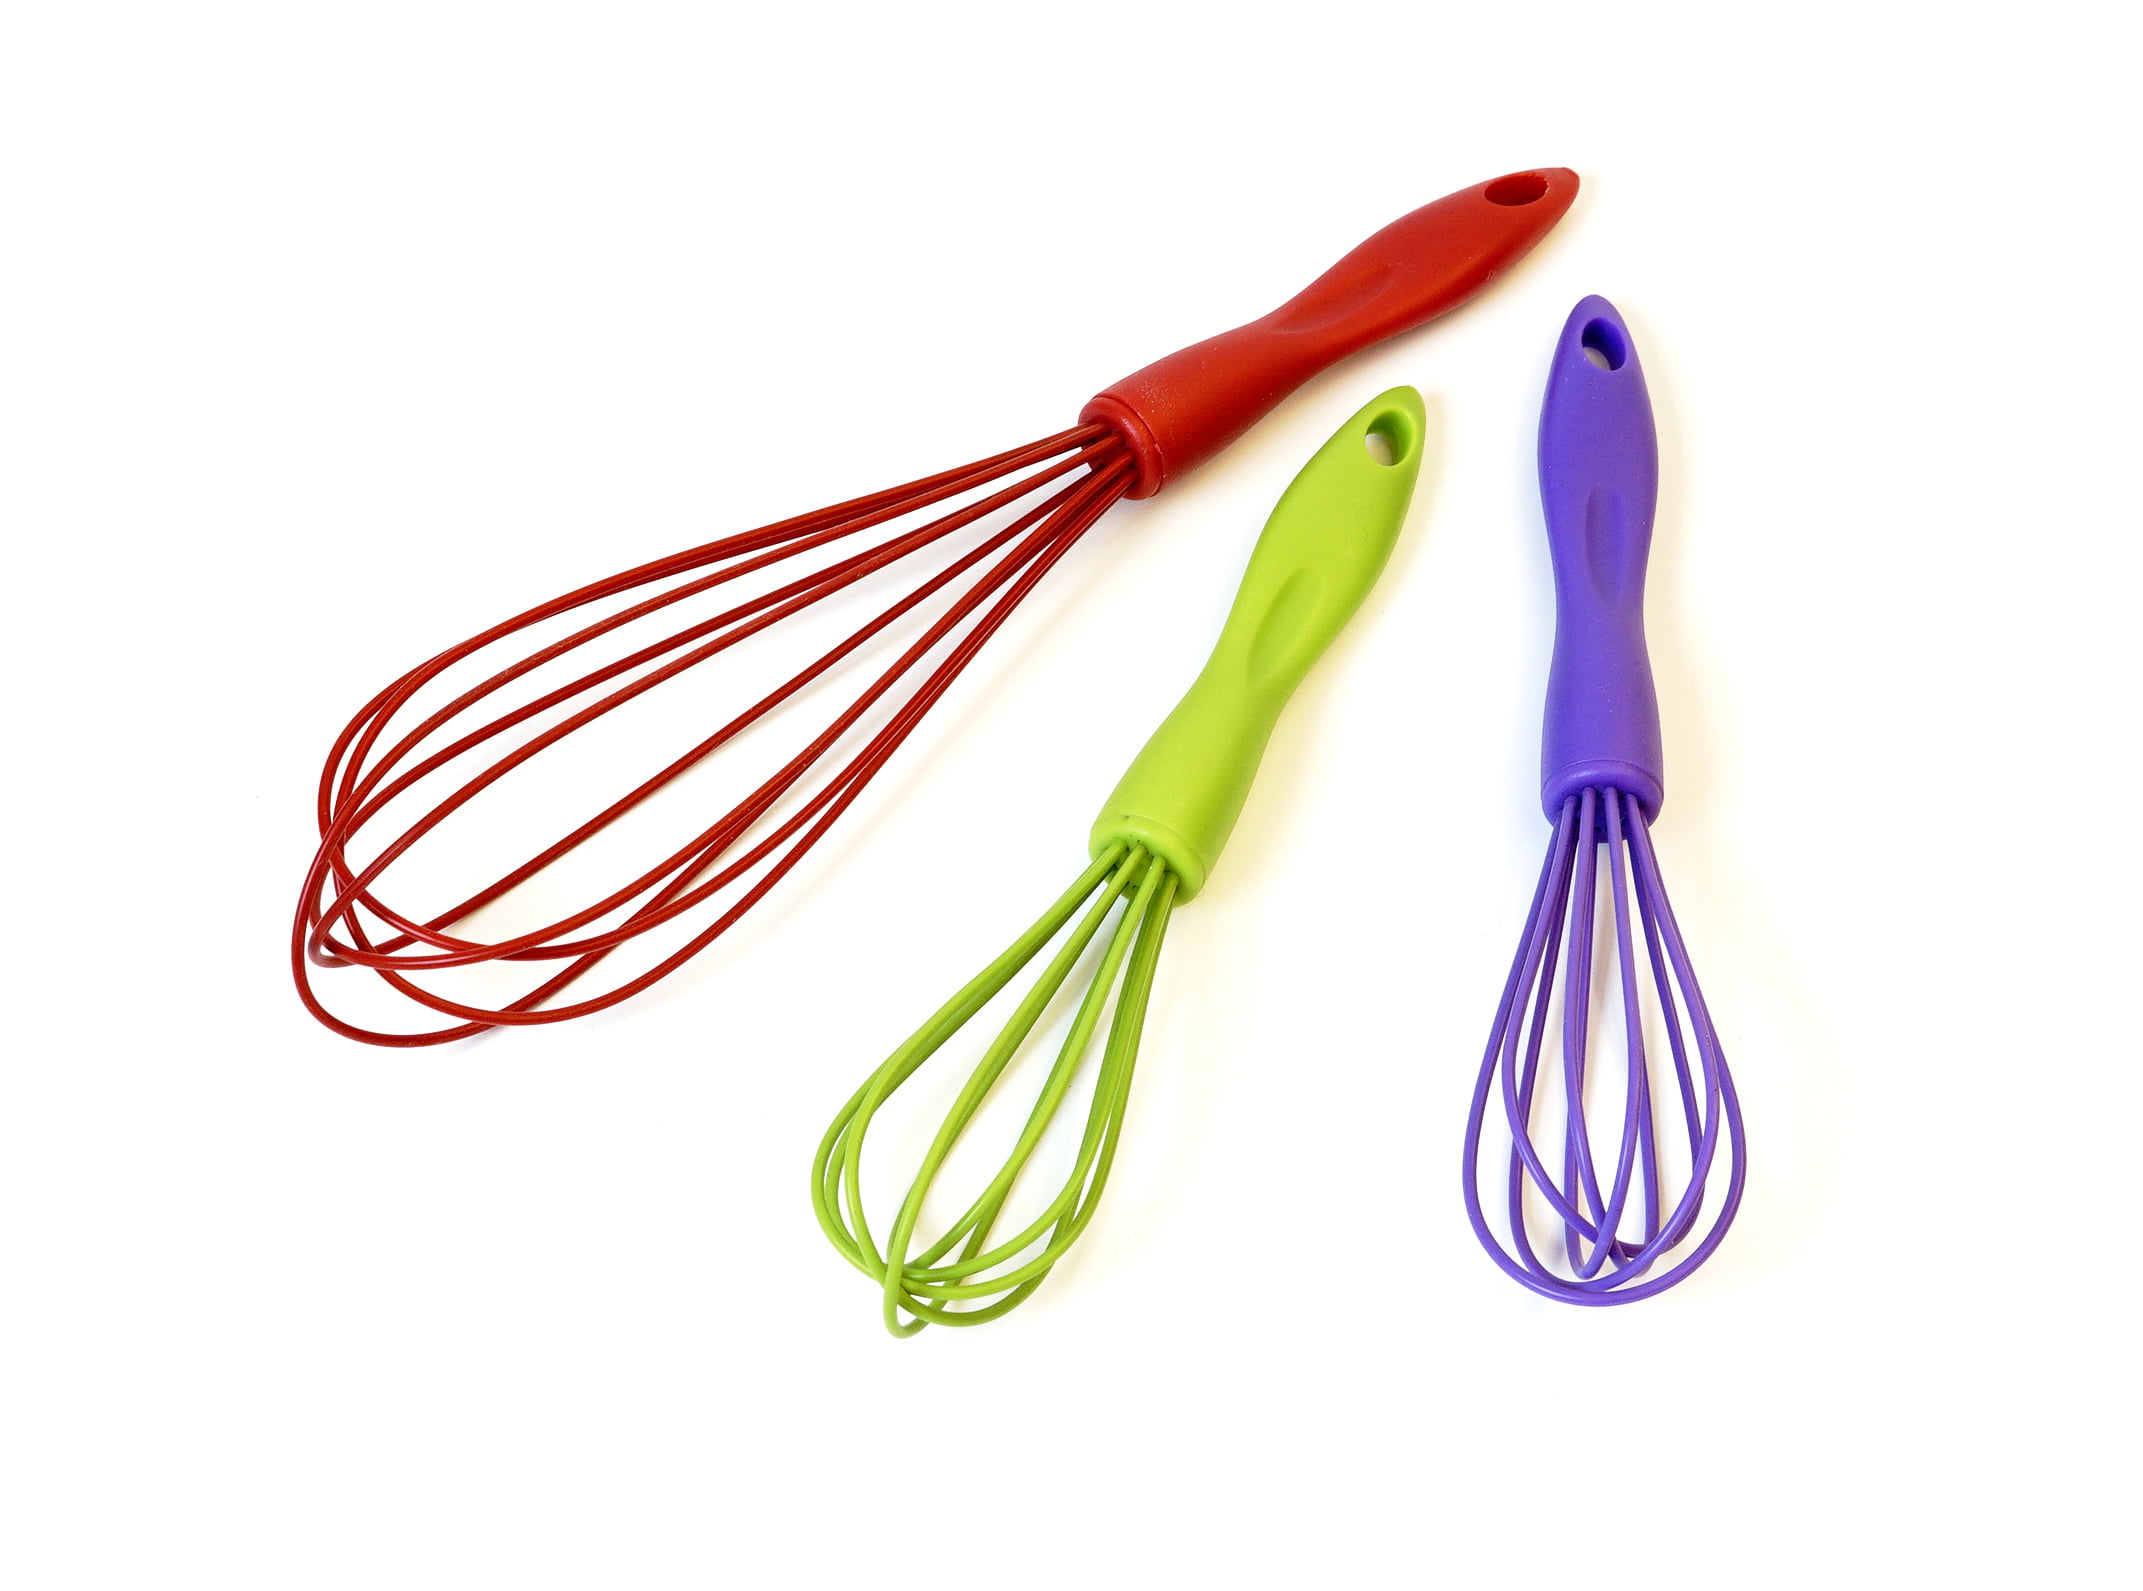 6 Inch Stainless Steel Silicone Whisk Multi Color Mini Whisk H5Z8 